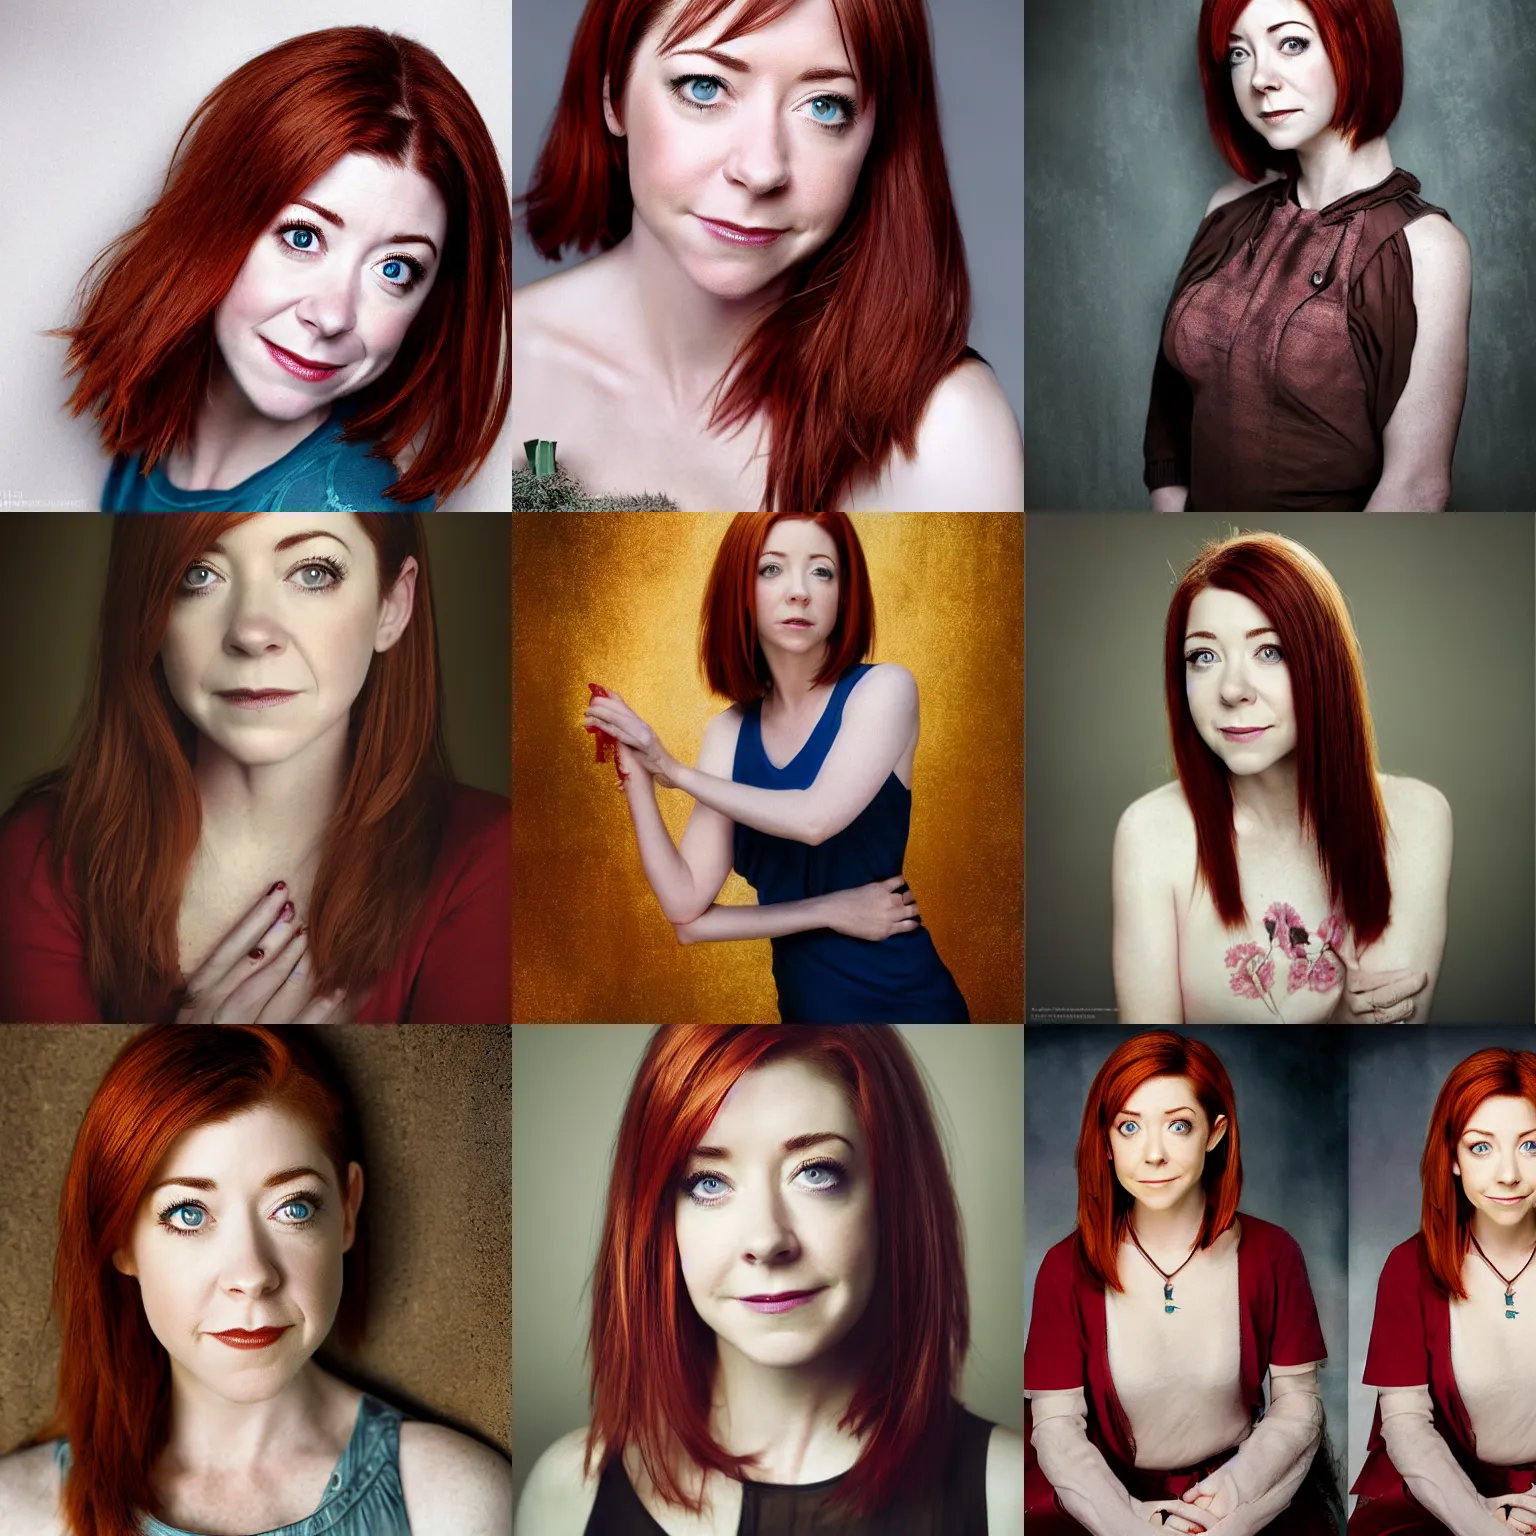 Prompt: Alyson Hannigan as Willow Rosenberg, fine art photography by Jingna Zhang